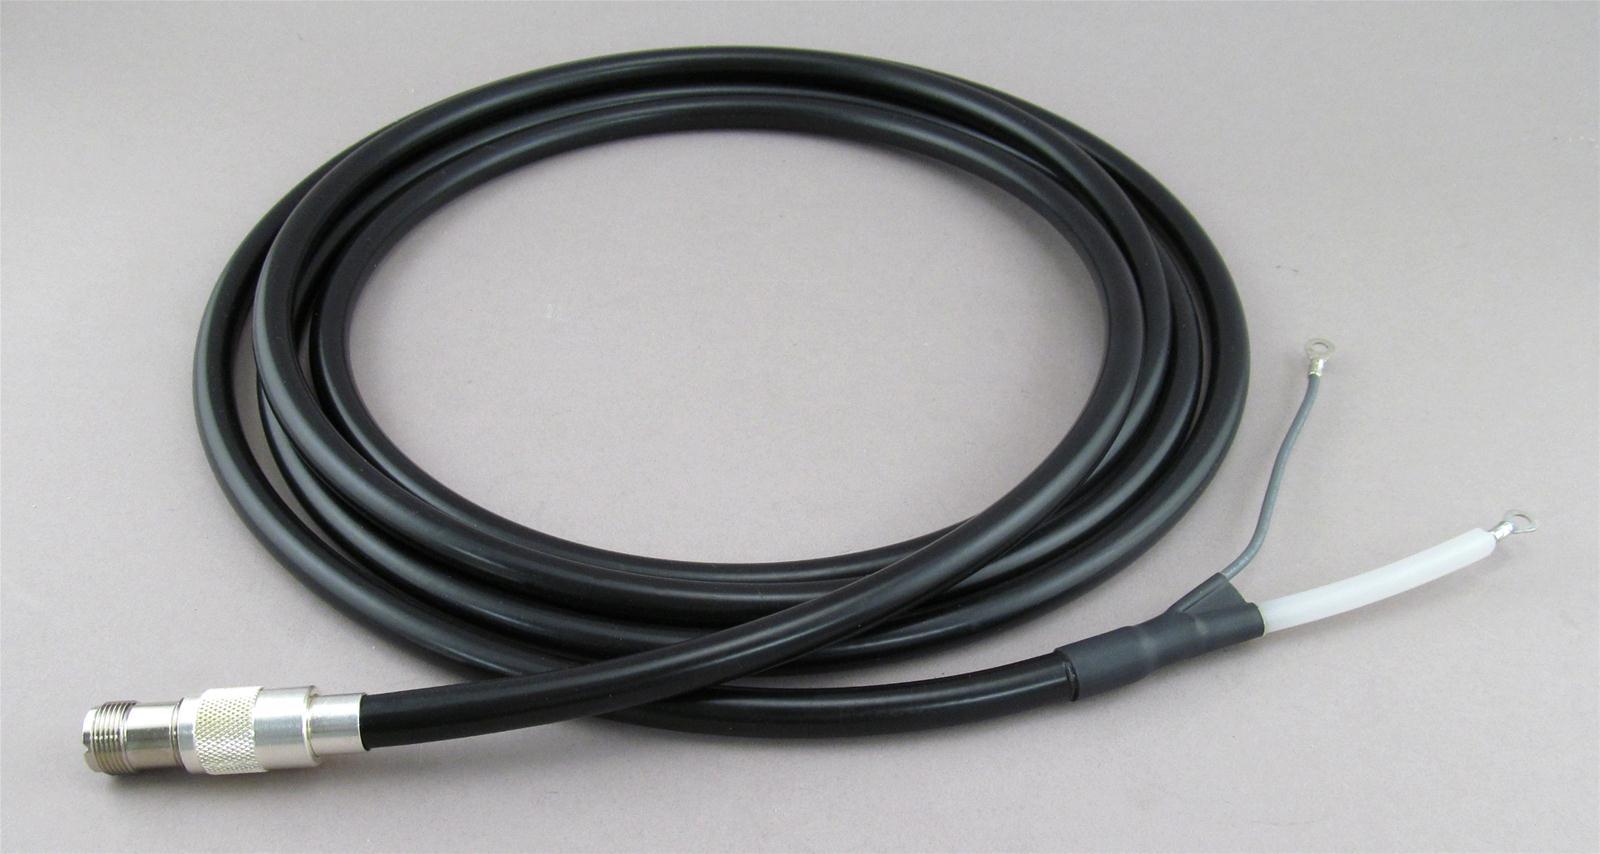 Butternut Antenna Replacement 75 Ohm Coaxial Matching Cable